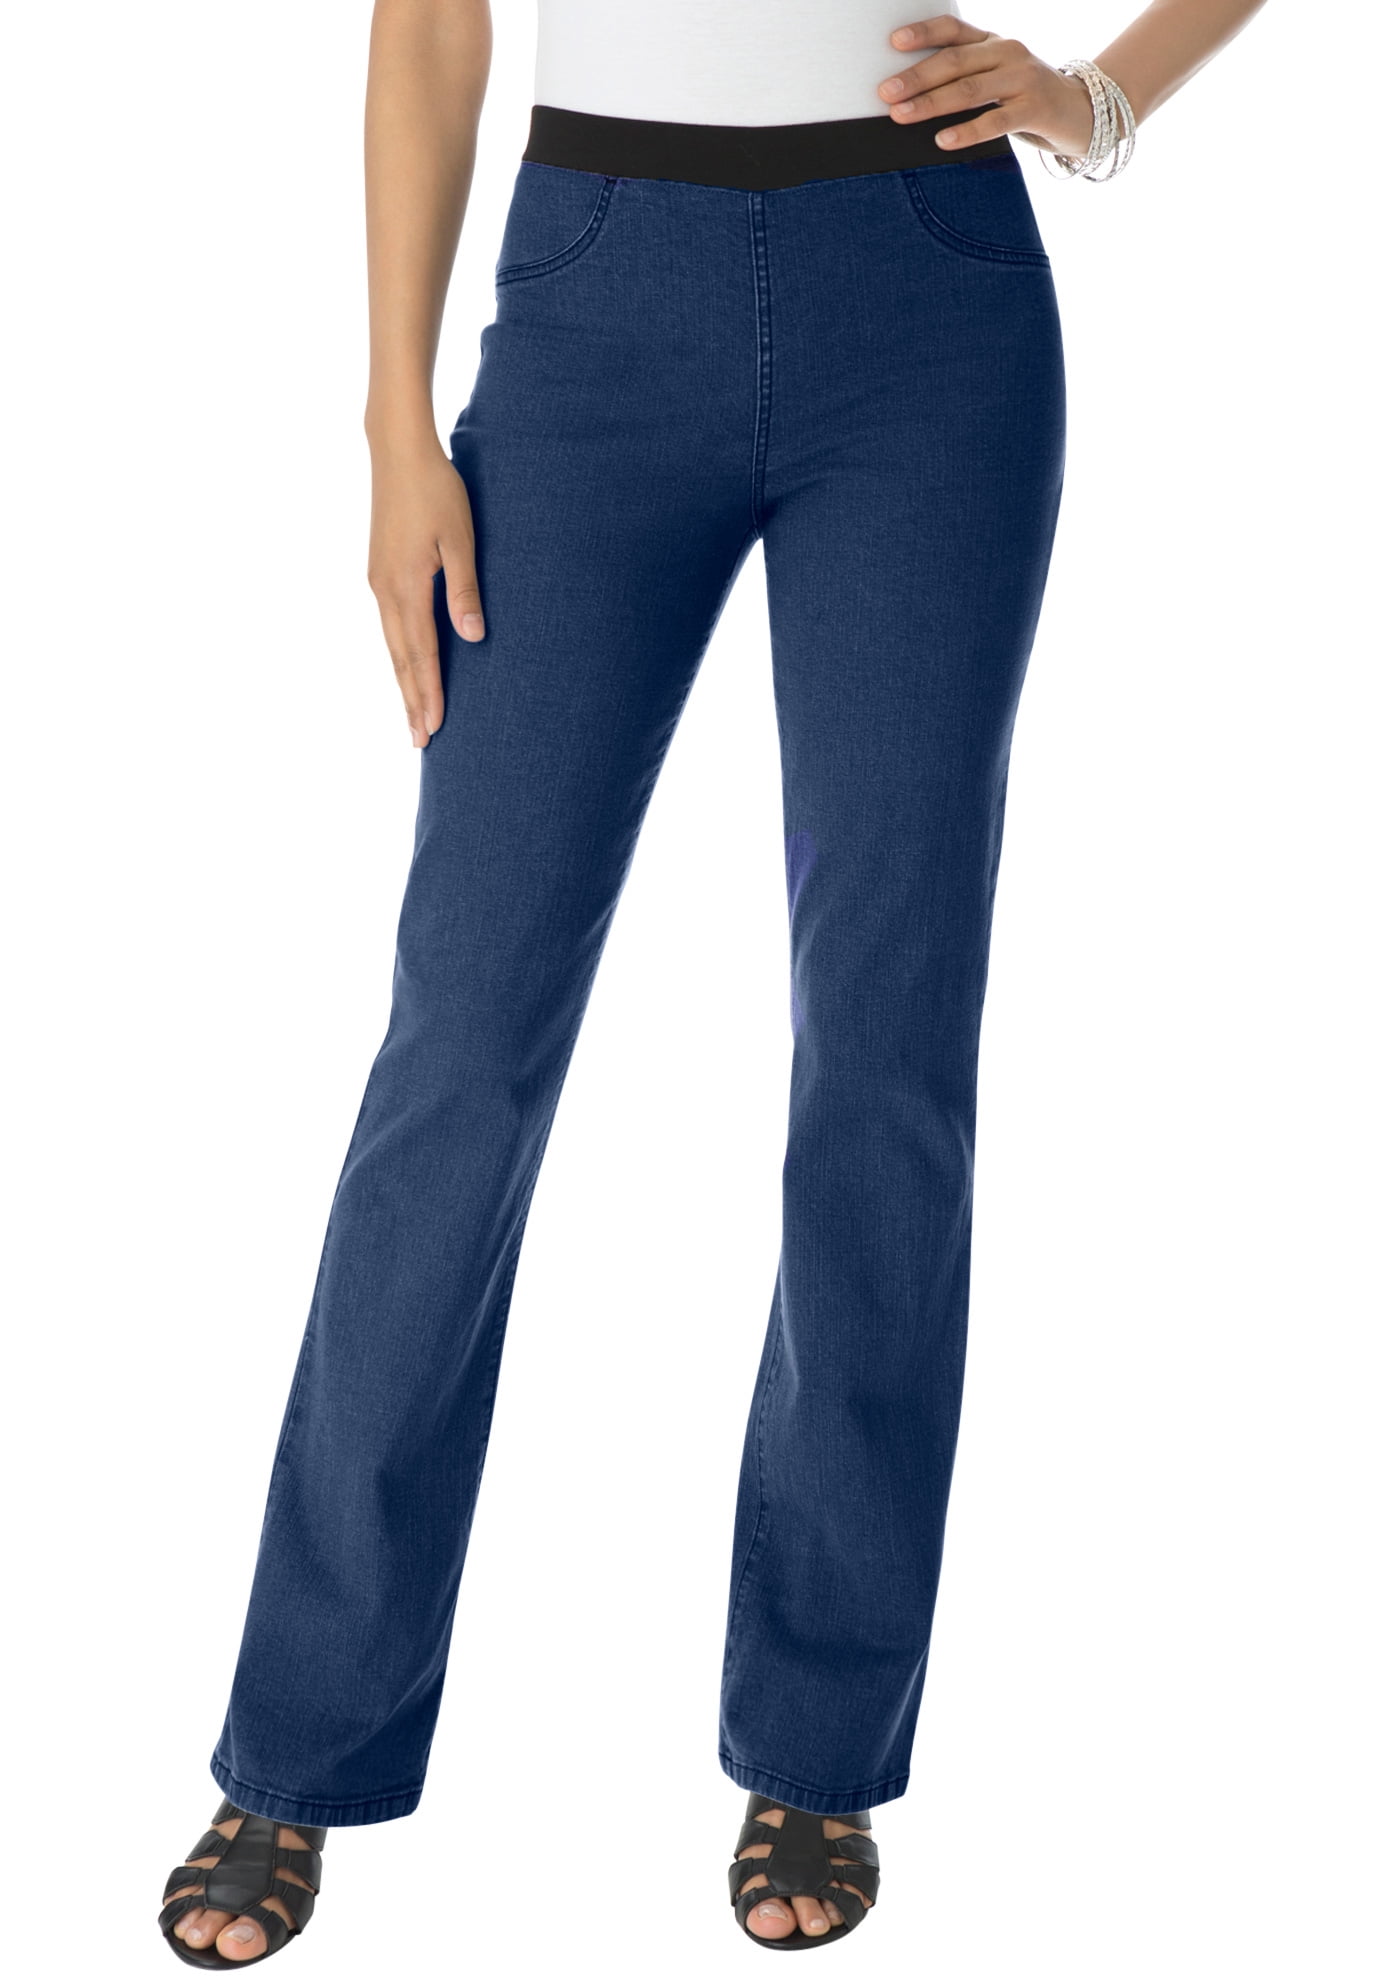 Roamans Women's Plus Size Invisible Stretch All Day Bootcut Jean ...